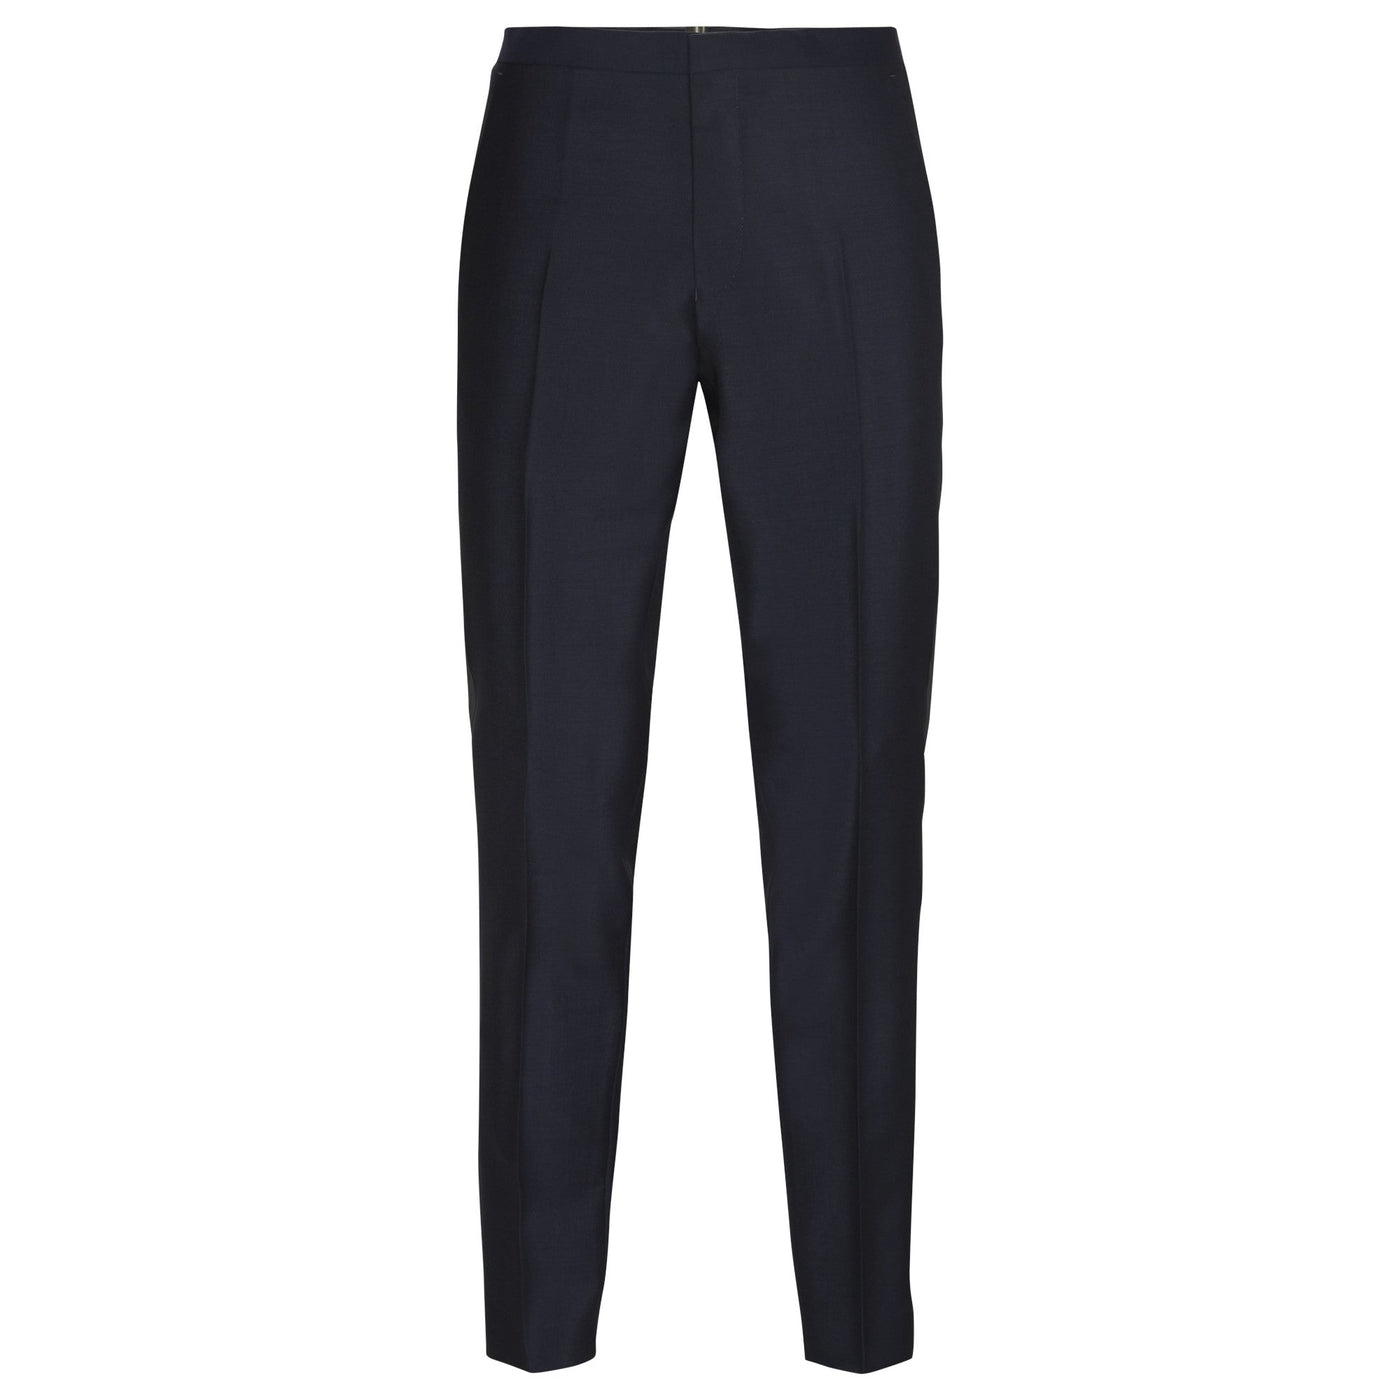 Gotstyle Fashion - Tiger Of Sweden Pants Wool/Mohair Tuxedo Pant - Navy